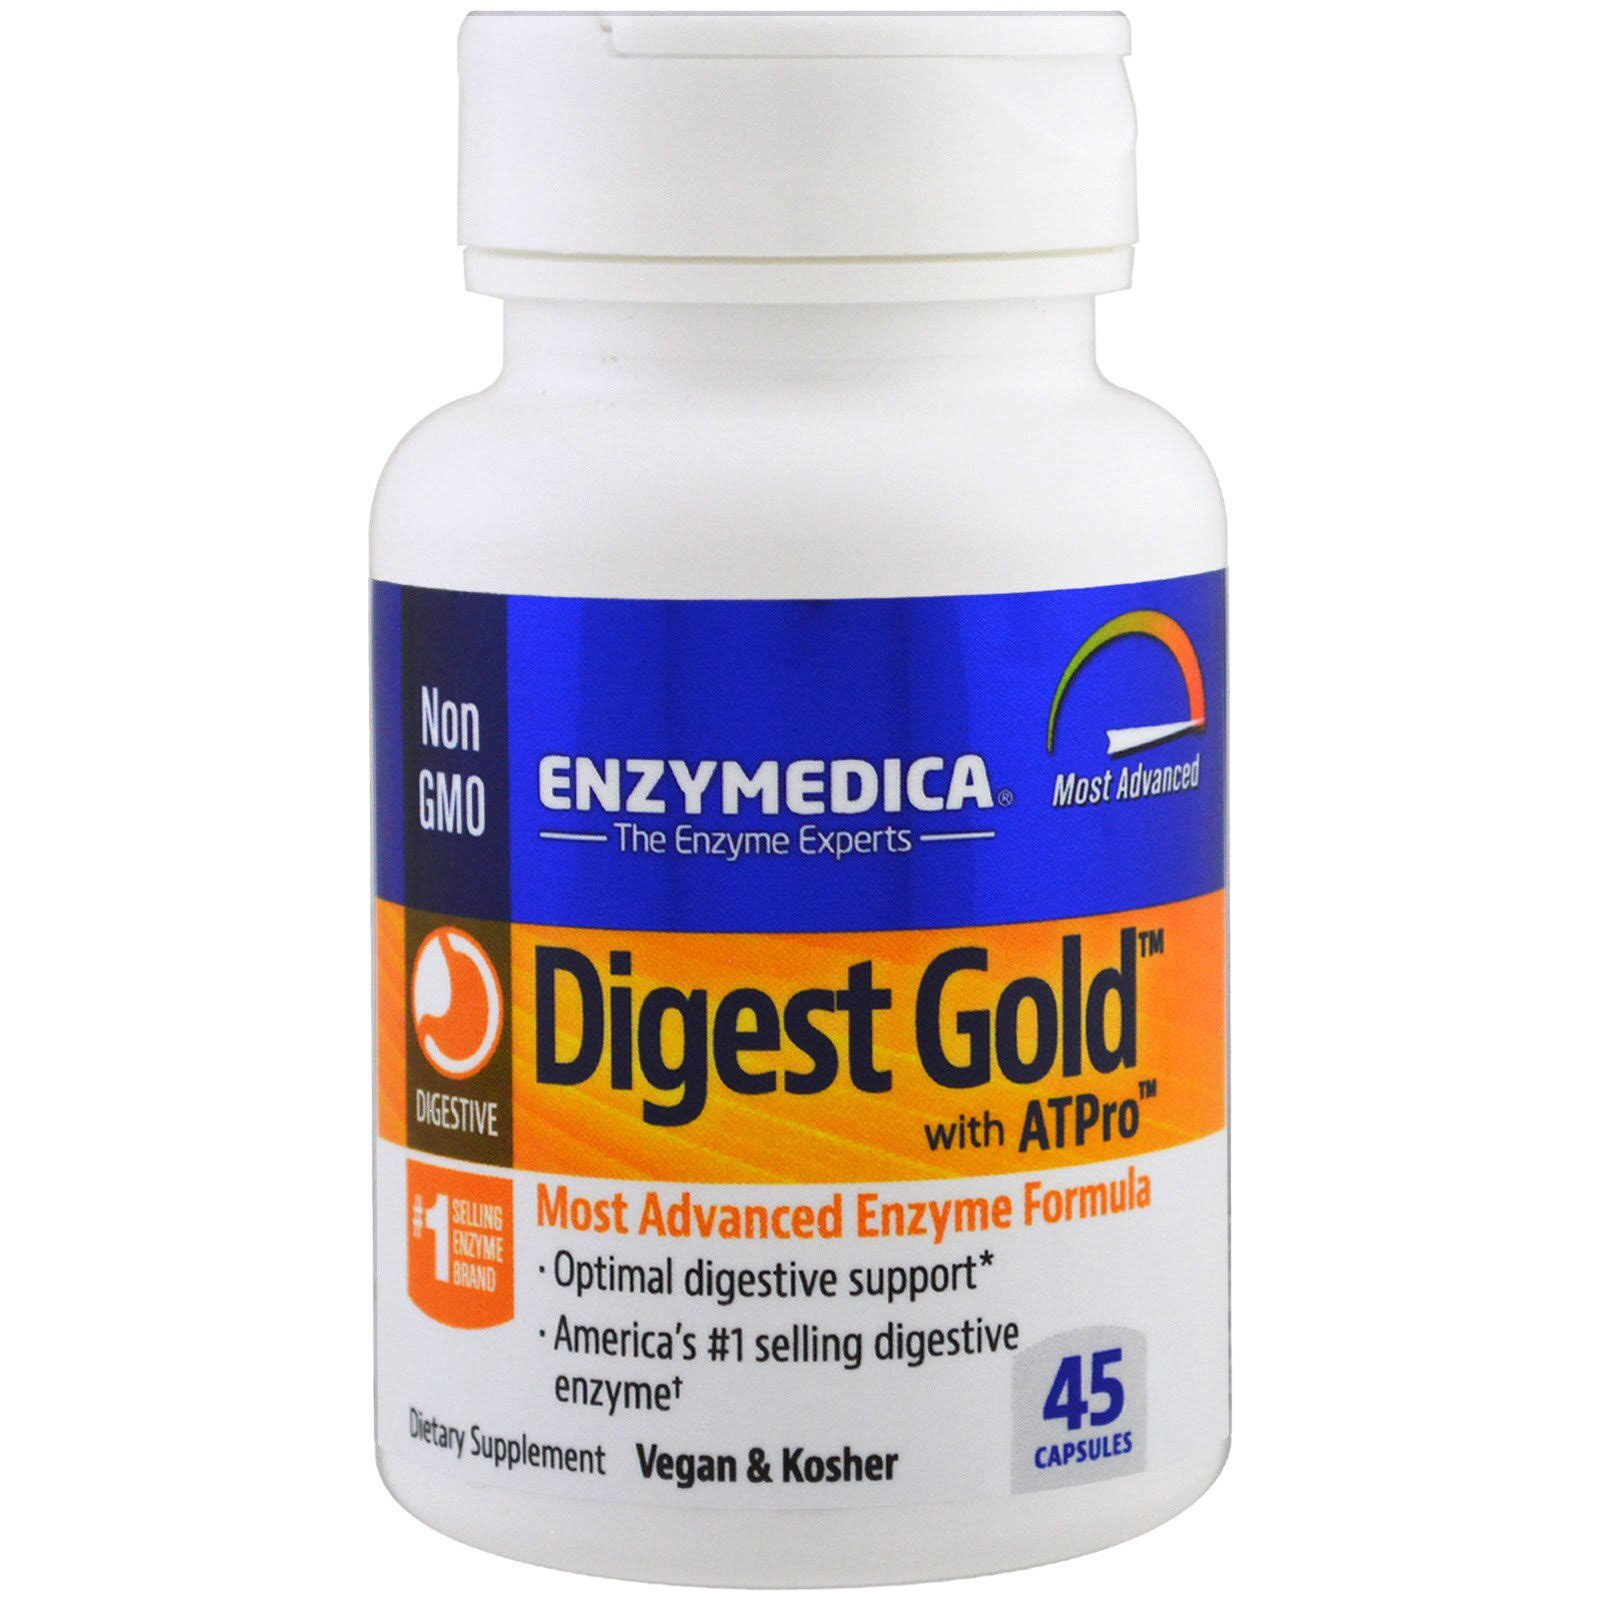 Enzymedica Digest Gold Dietary Supplement - 45 Capsules